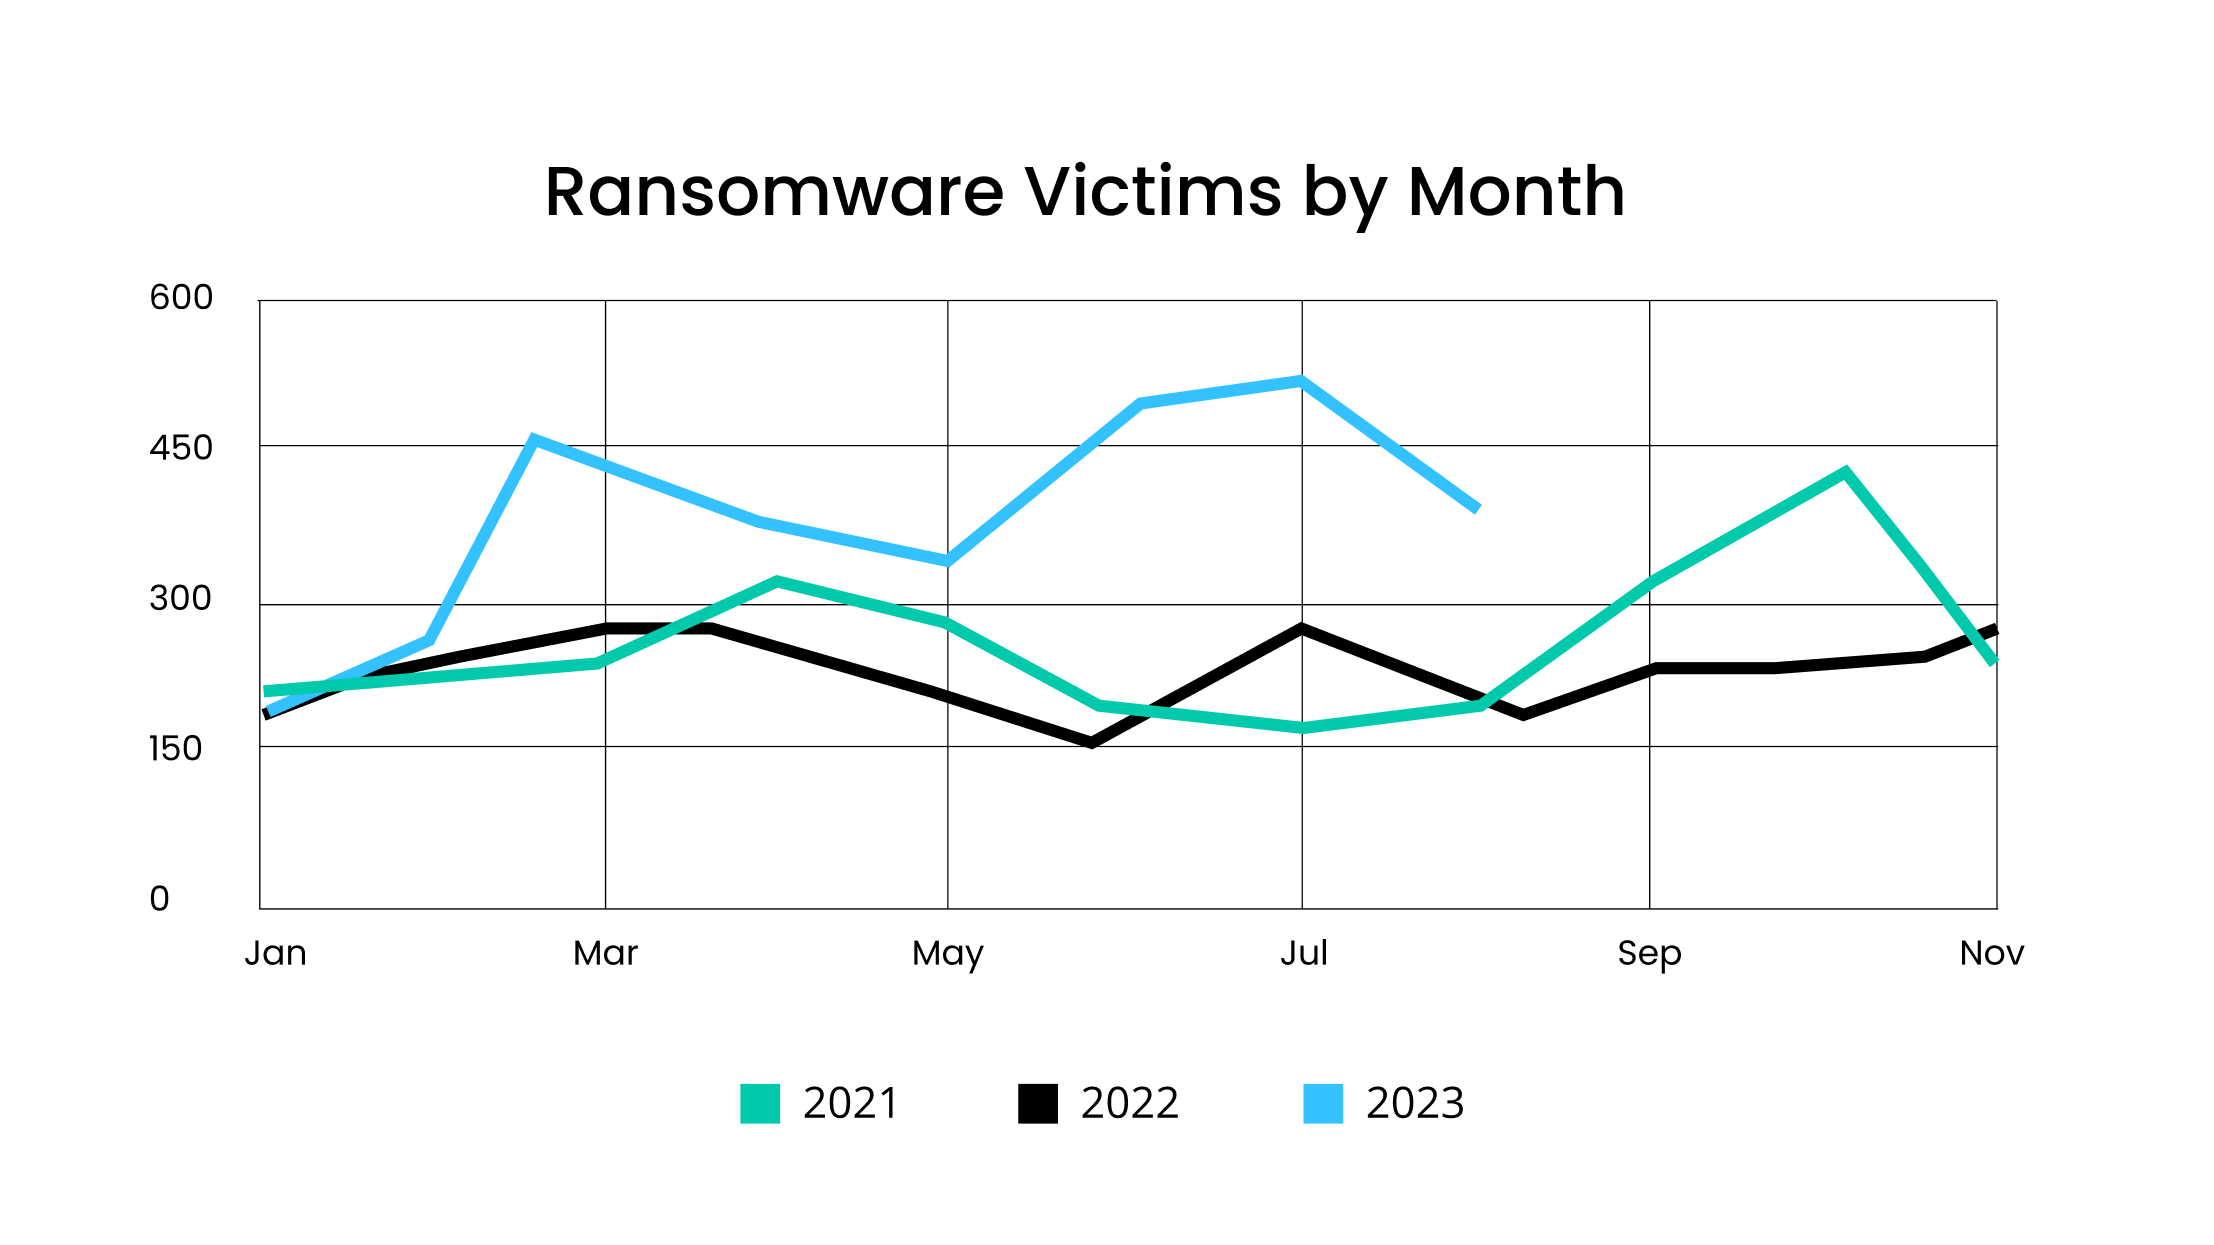 [LINE GRAPH] Ransomware Victims by Month Jan. 2021 - Nov. 2023